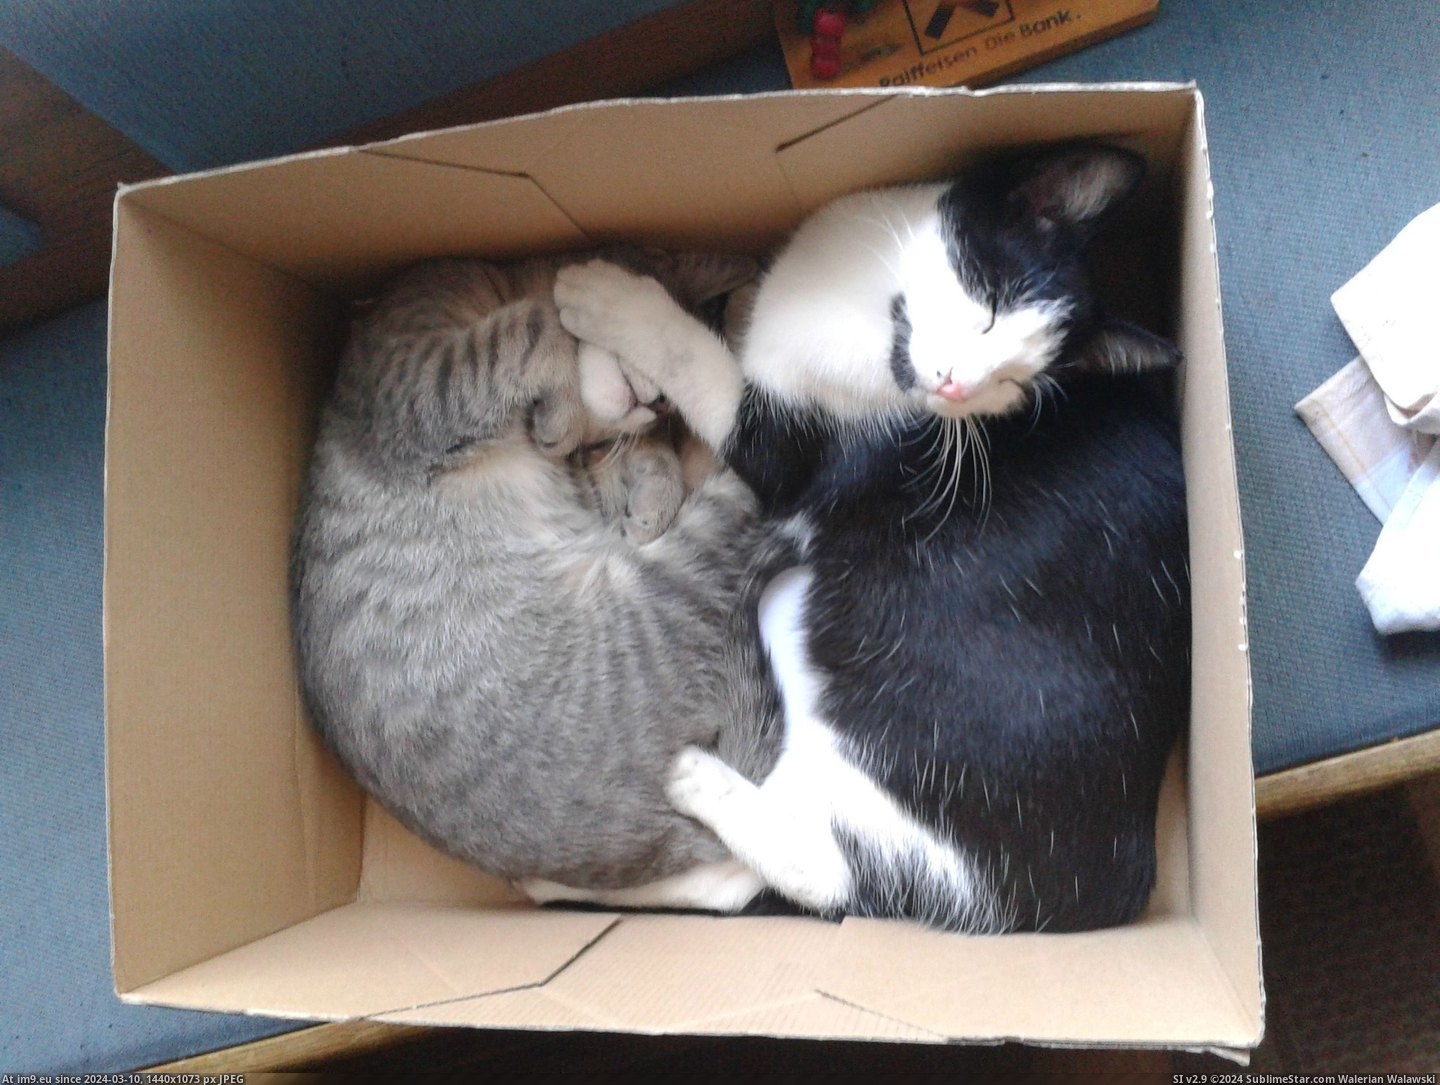 #Cats #Old #Two #Did #Grow #Quickly #Finding #Months #Weeks #Kittens #Few [Cats] A few months back I did a post about finding 2 two-weeks-old kittens. They grow so quickly 4 Pic. (Image of album My r/CATS favs))